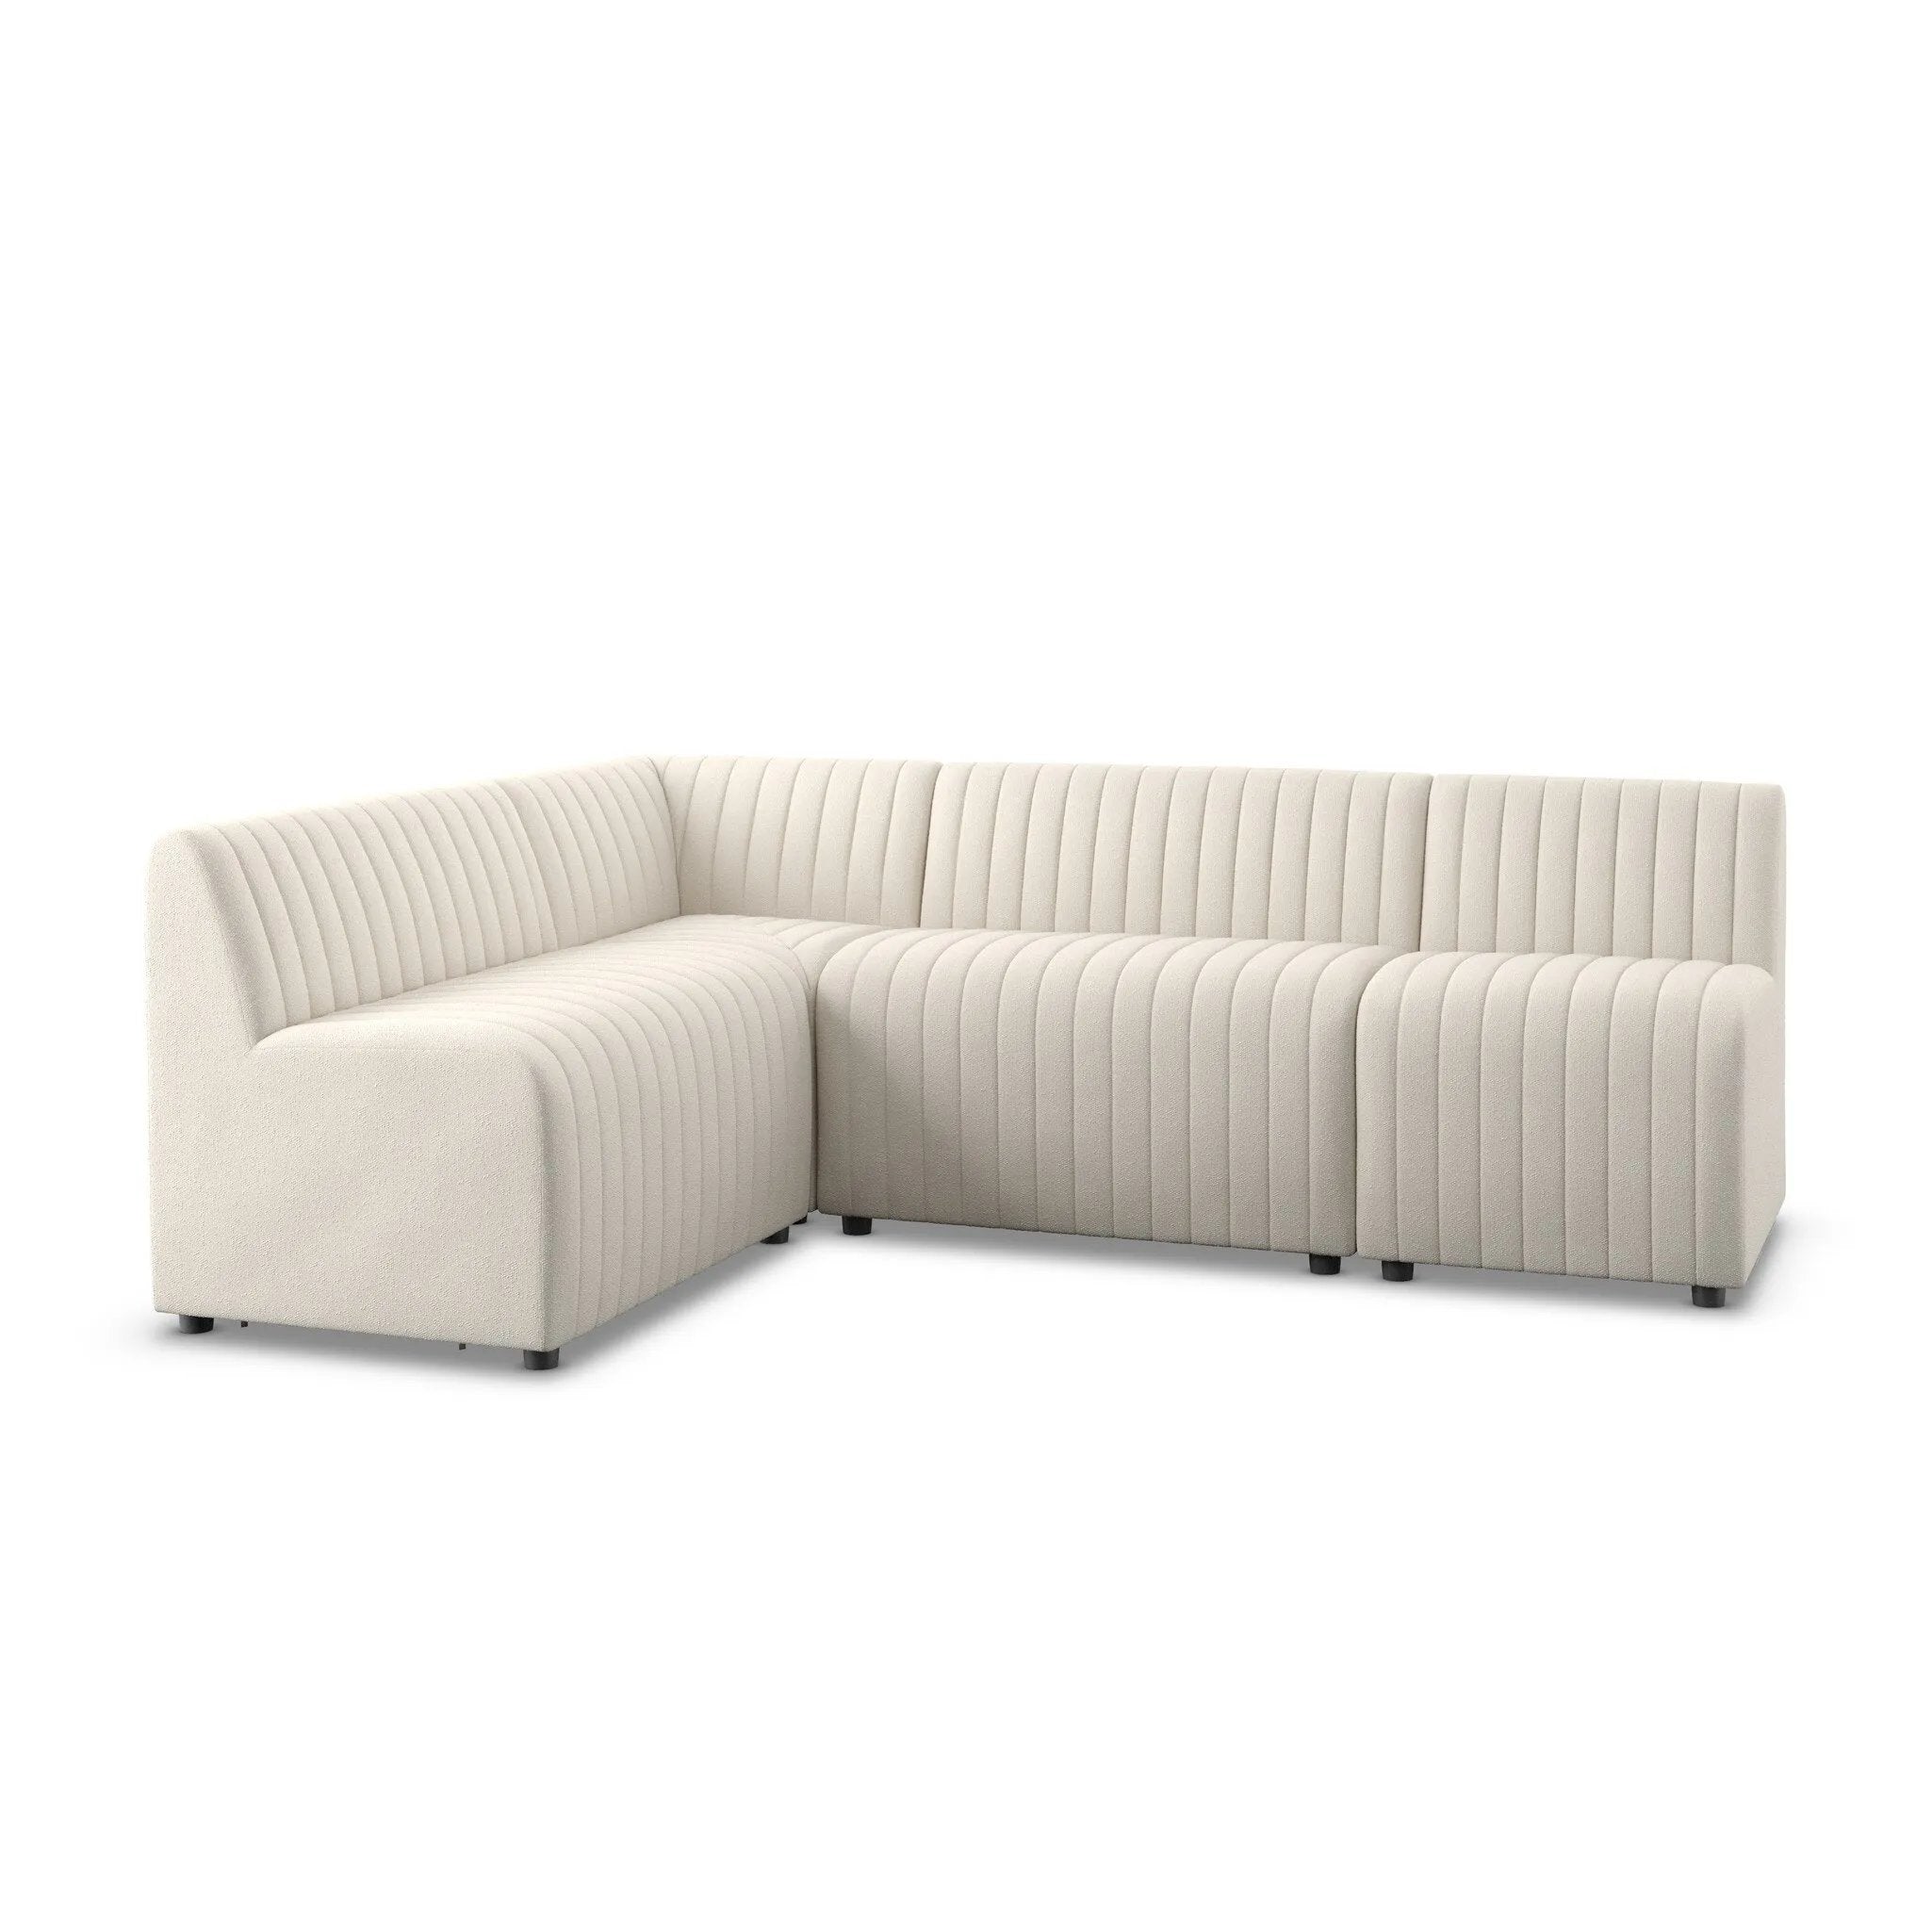 High-performance fabric in a versatile oatmeal hue features dramatic channeling, for trend-forward texture and sumptuous sit. Option to pair with matching pieces for clever modularity.Overall Dimensions91.50"w x 66.50"d x 31.50"hFull Details &amp; SpecificationsTear SheetBack Cushion Attachment : Fixe Amethyst Home provides interior design, new home construction design consulting, vintage area rugs, and lighting in the Tampa metro area.